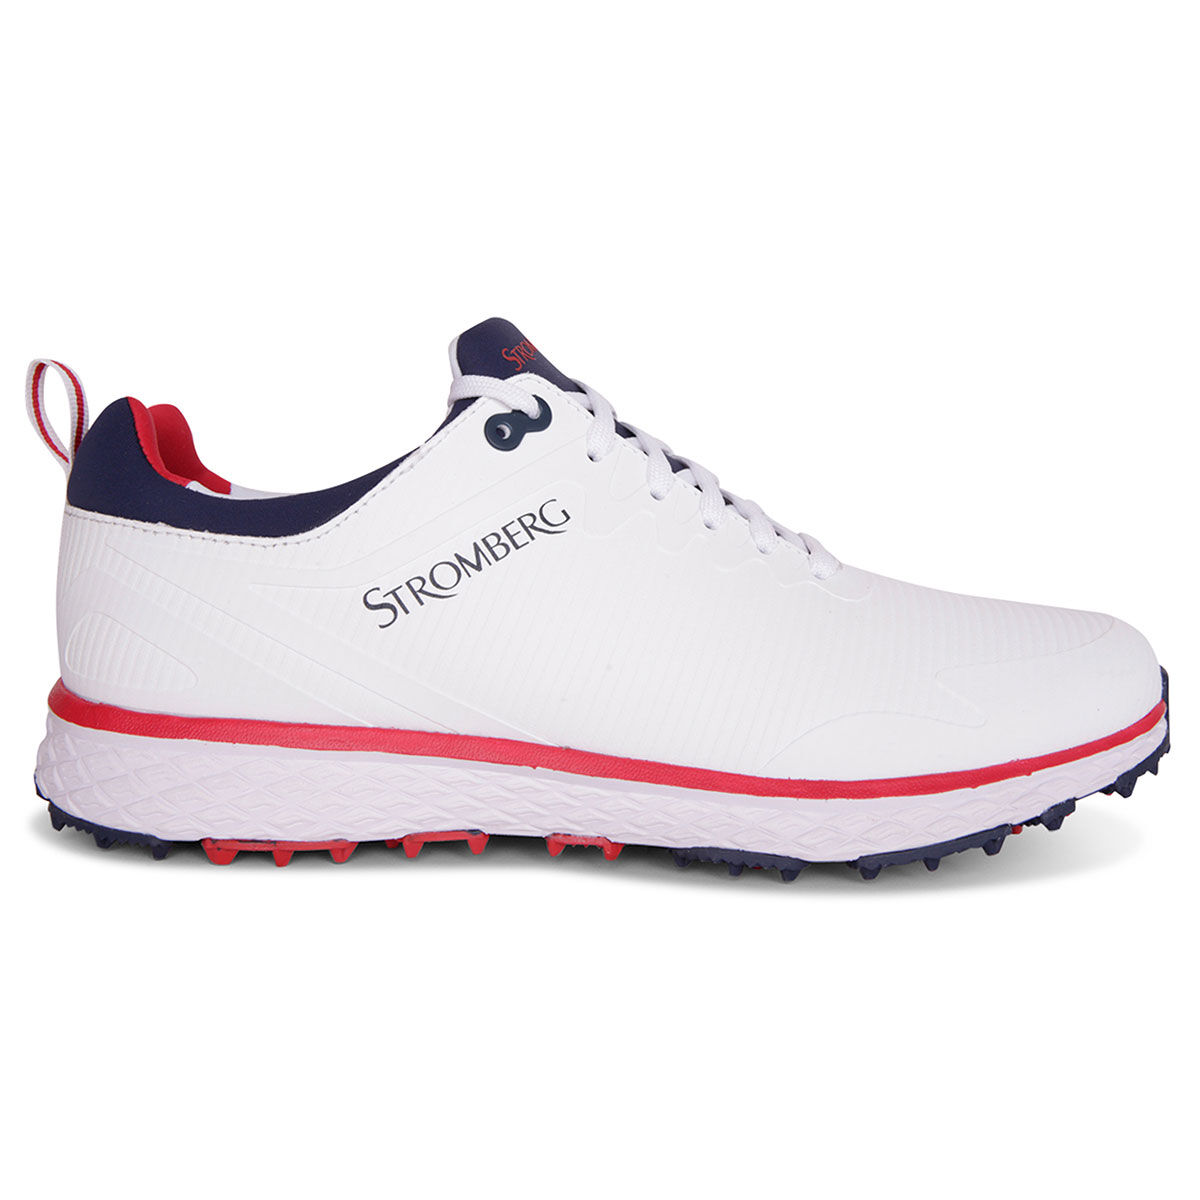 Chaussures Stromberg Tempo Spikeless, homme, White/red/navy, 7  | Online Golf